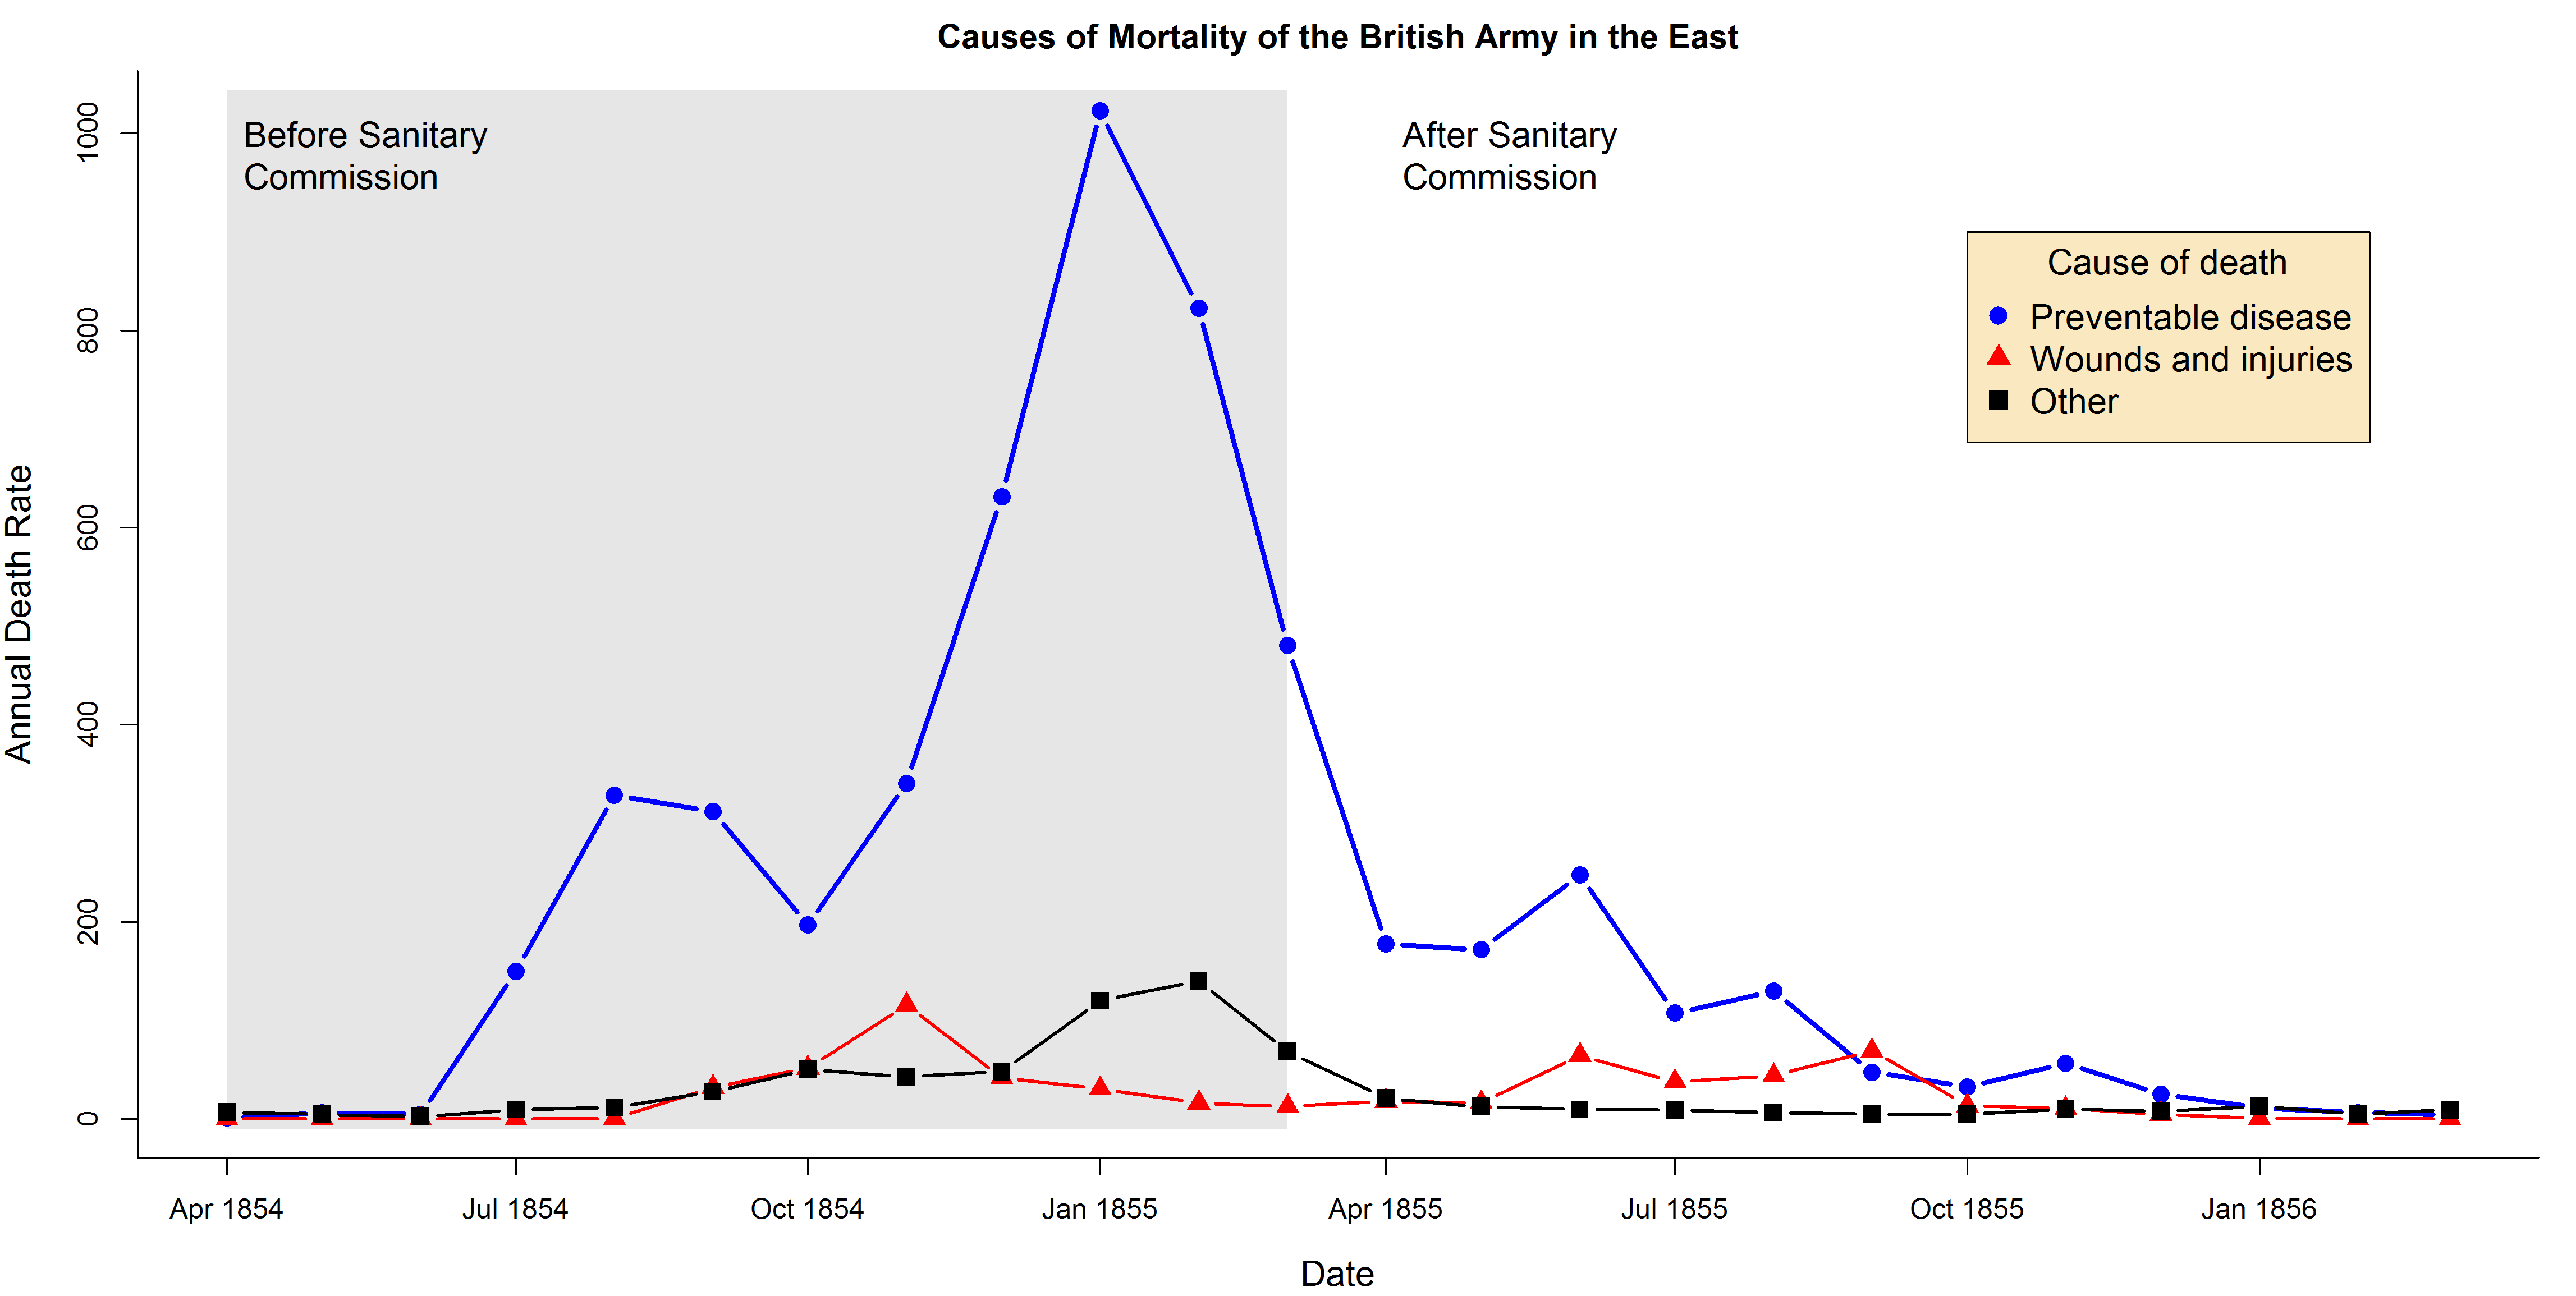 Line graph of Nightingale’s data: The data on causes of mortality plotted as a time-series line graph.